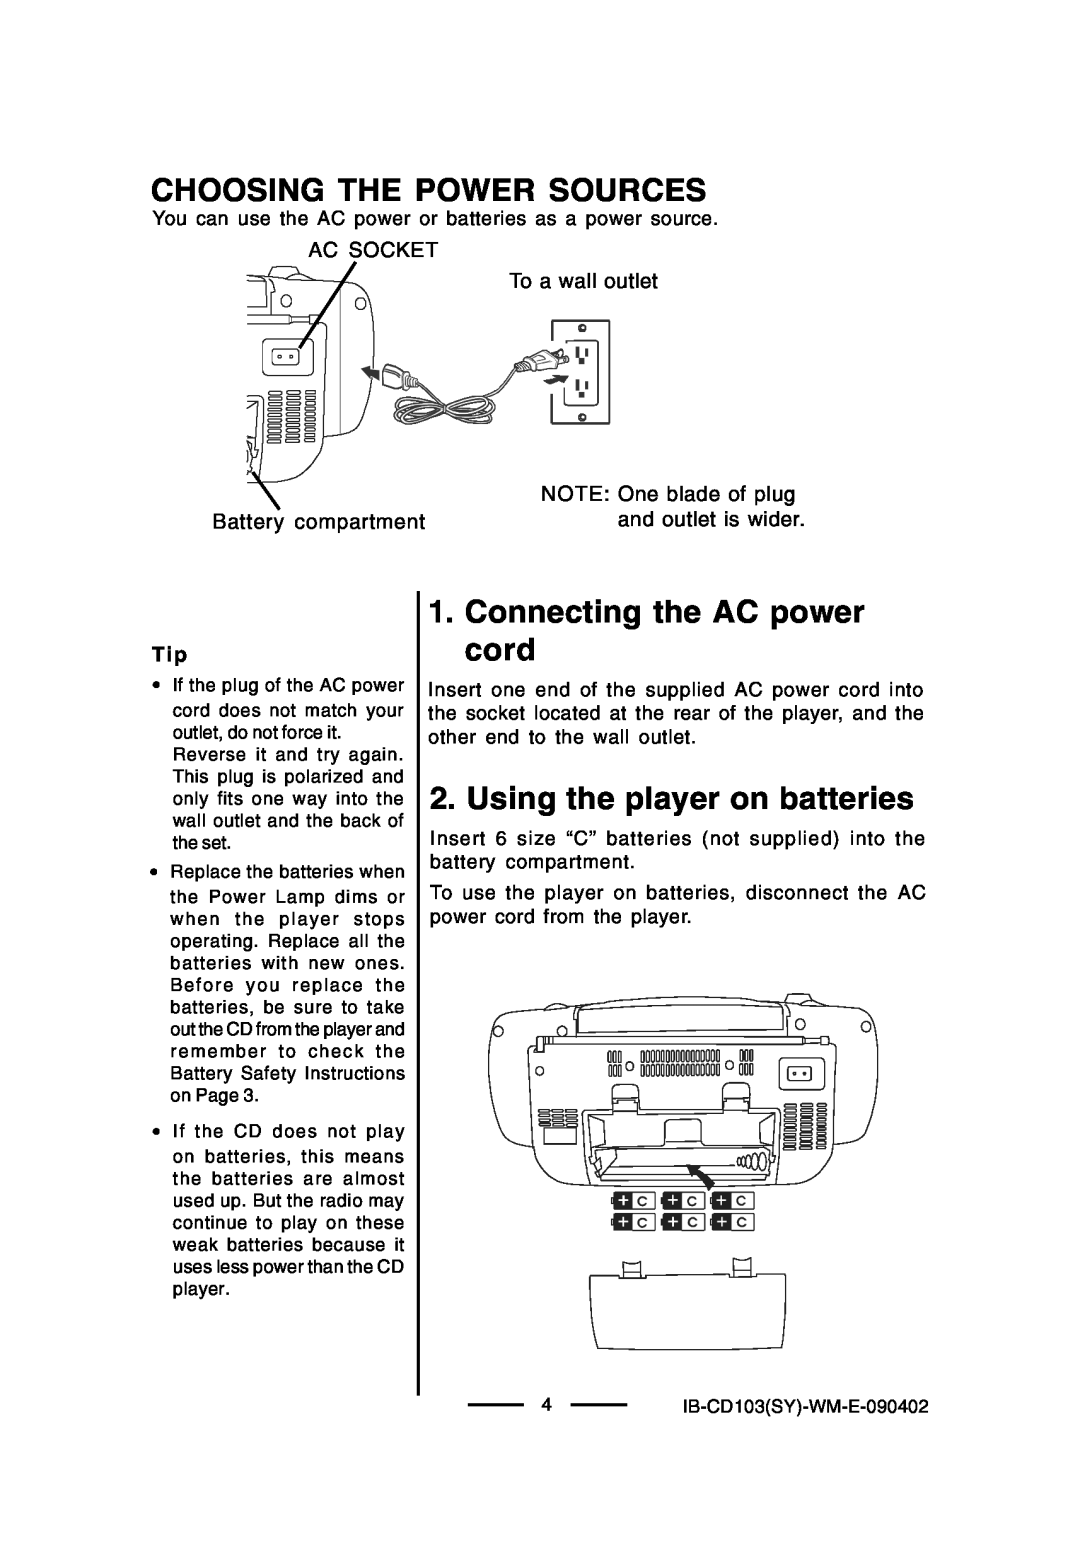 Lenoxx Electronics BP-103, CD-103 Choosing The Power Sources, Connecting the AC power cord, Using the player on batteries 